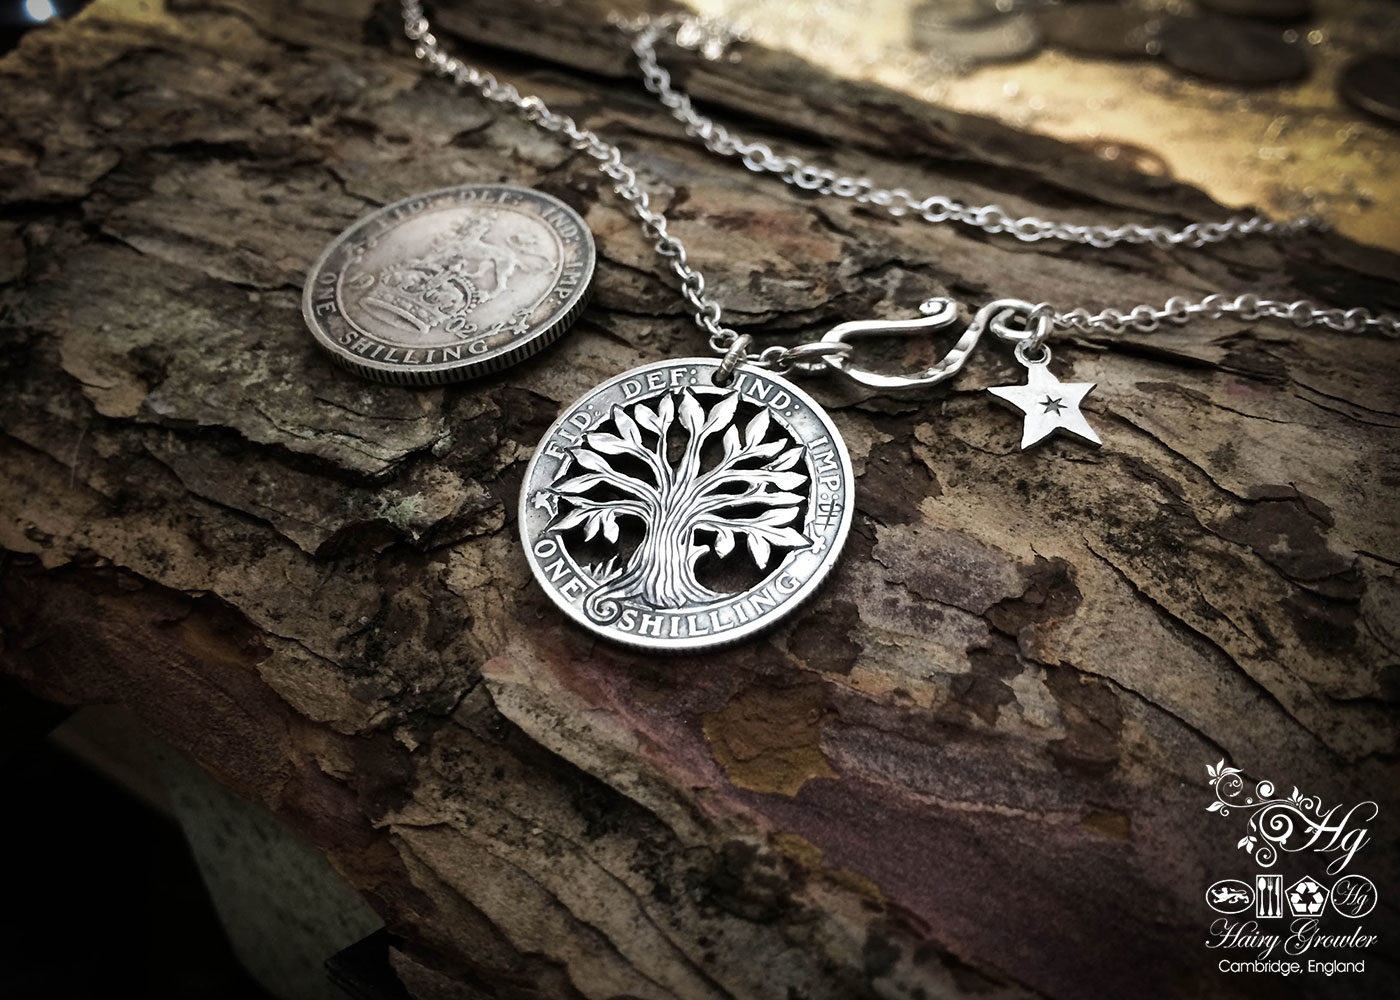 The Silver Shilling collection. silver tree-of-life necklace totally handcrafted and recycled from old sterling silver shilling coins. Designed and created by Hairy Growler Jewellery, Cambridge, UK